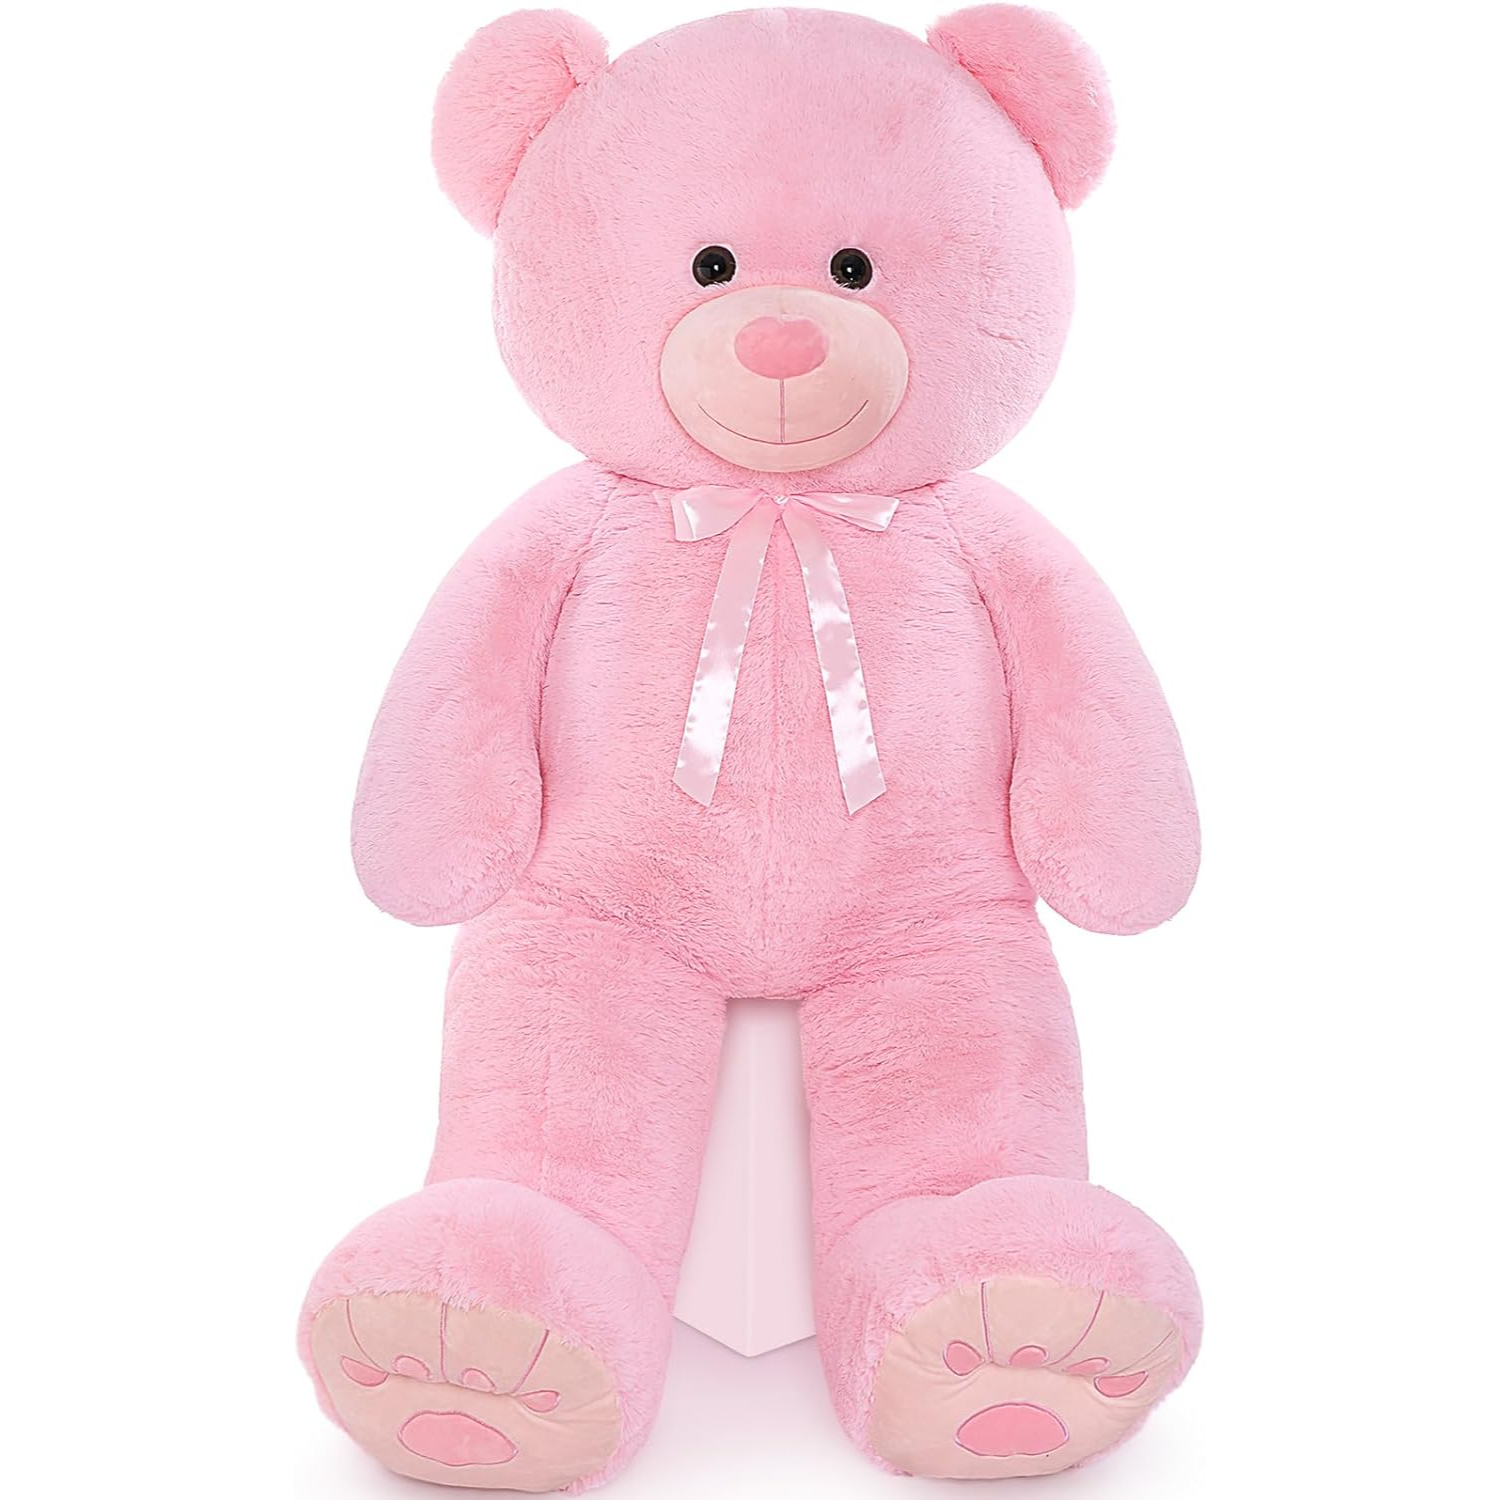 Teddy Bear Plush Toy, Light Brown/Brown/Pink/Beige, 35.4/48.82/59 Inches